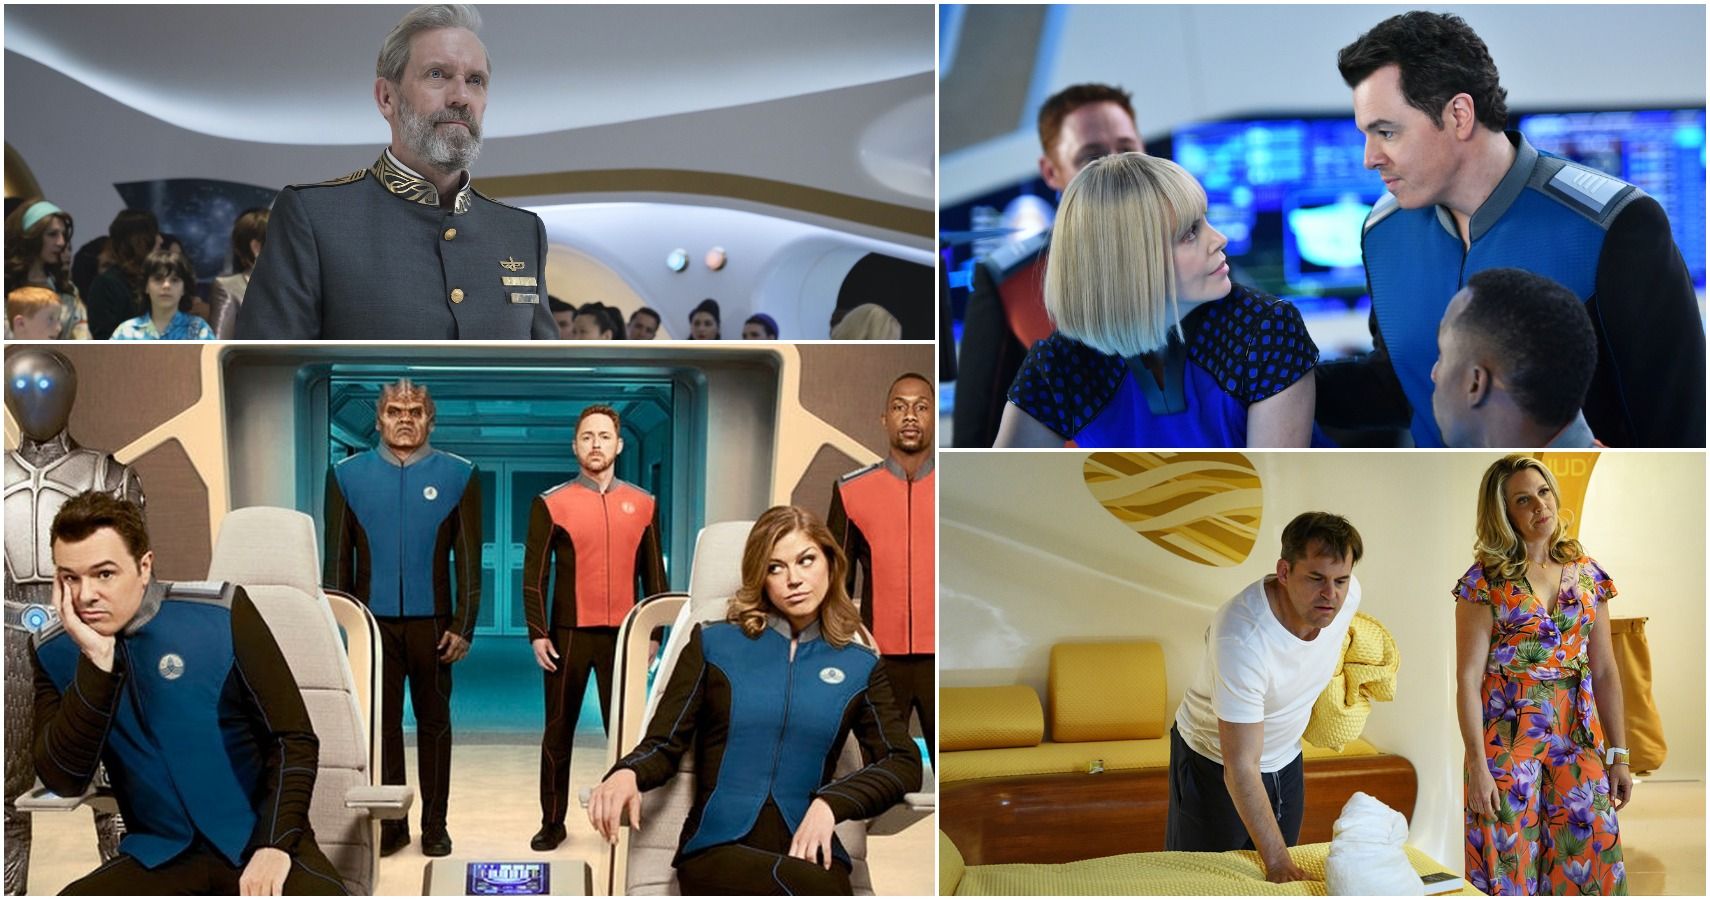 5 Things Avenue 5 Does Better Than The Orville (& 5 It Does Worse)